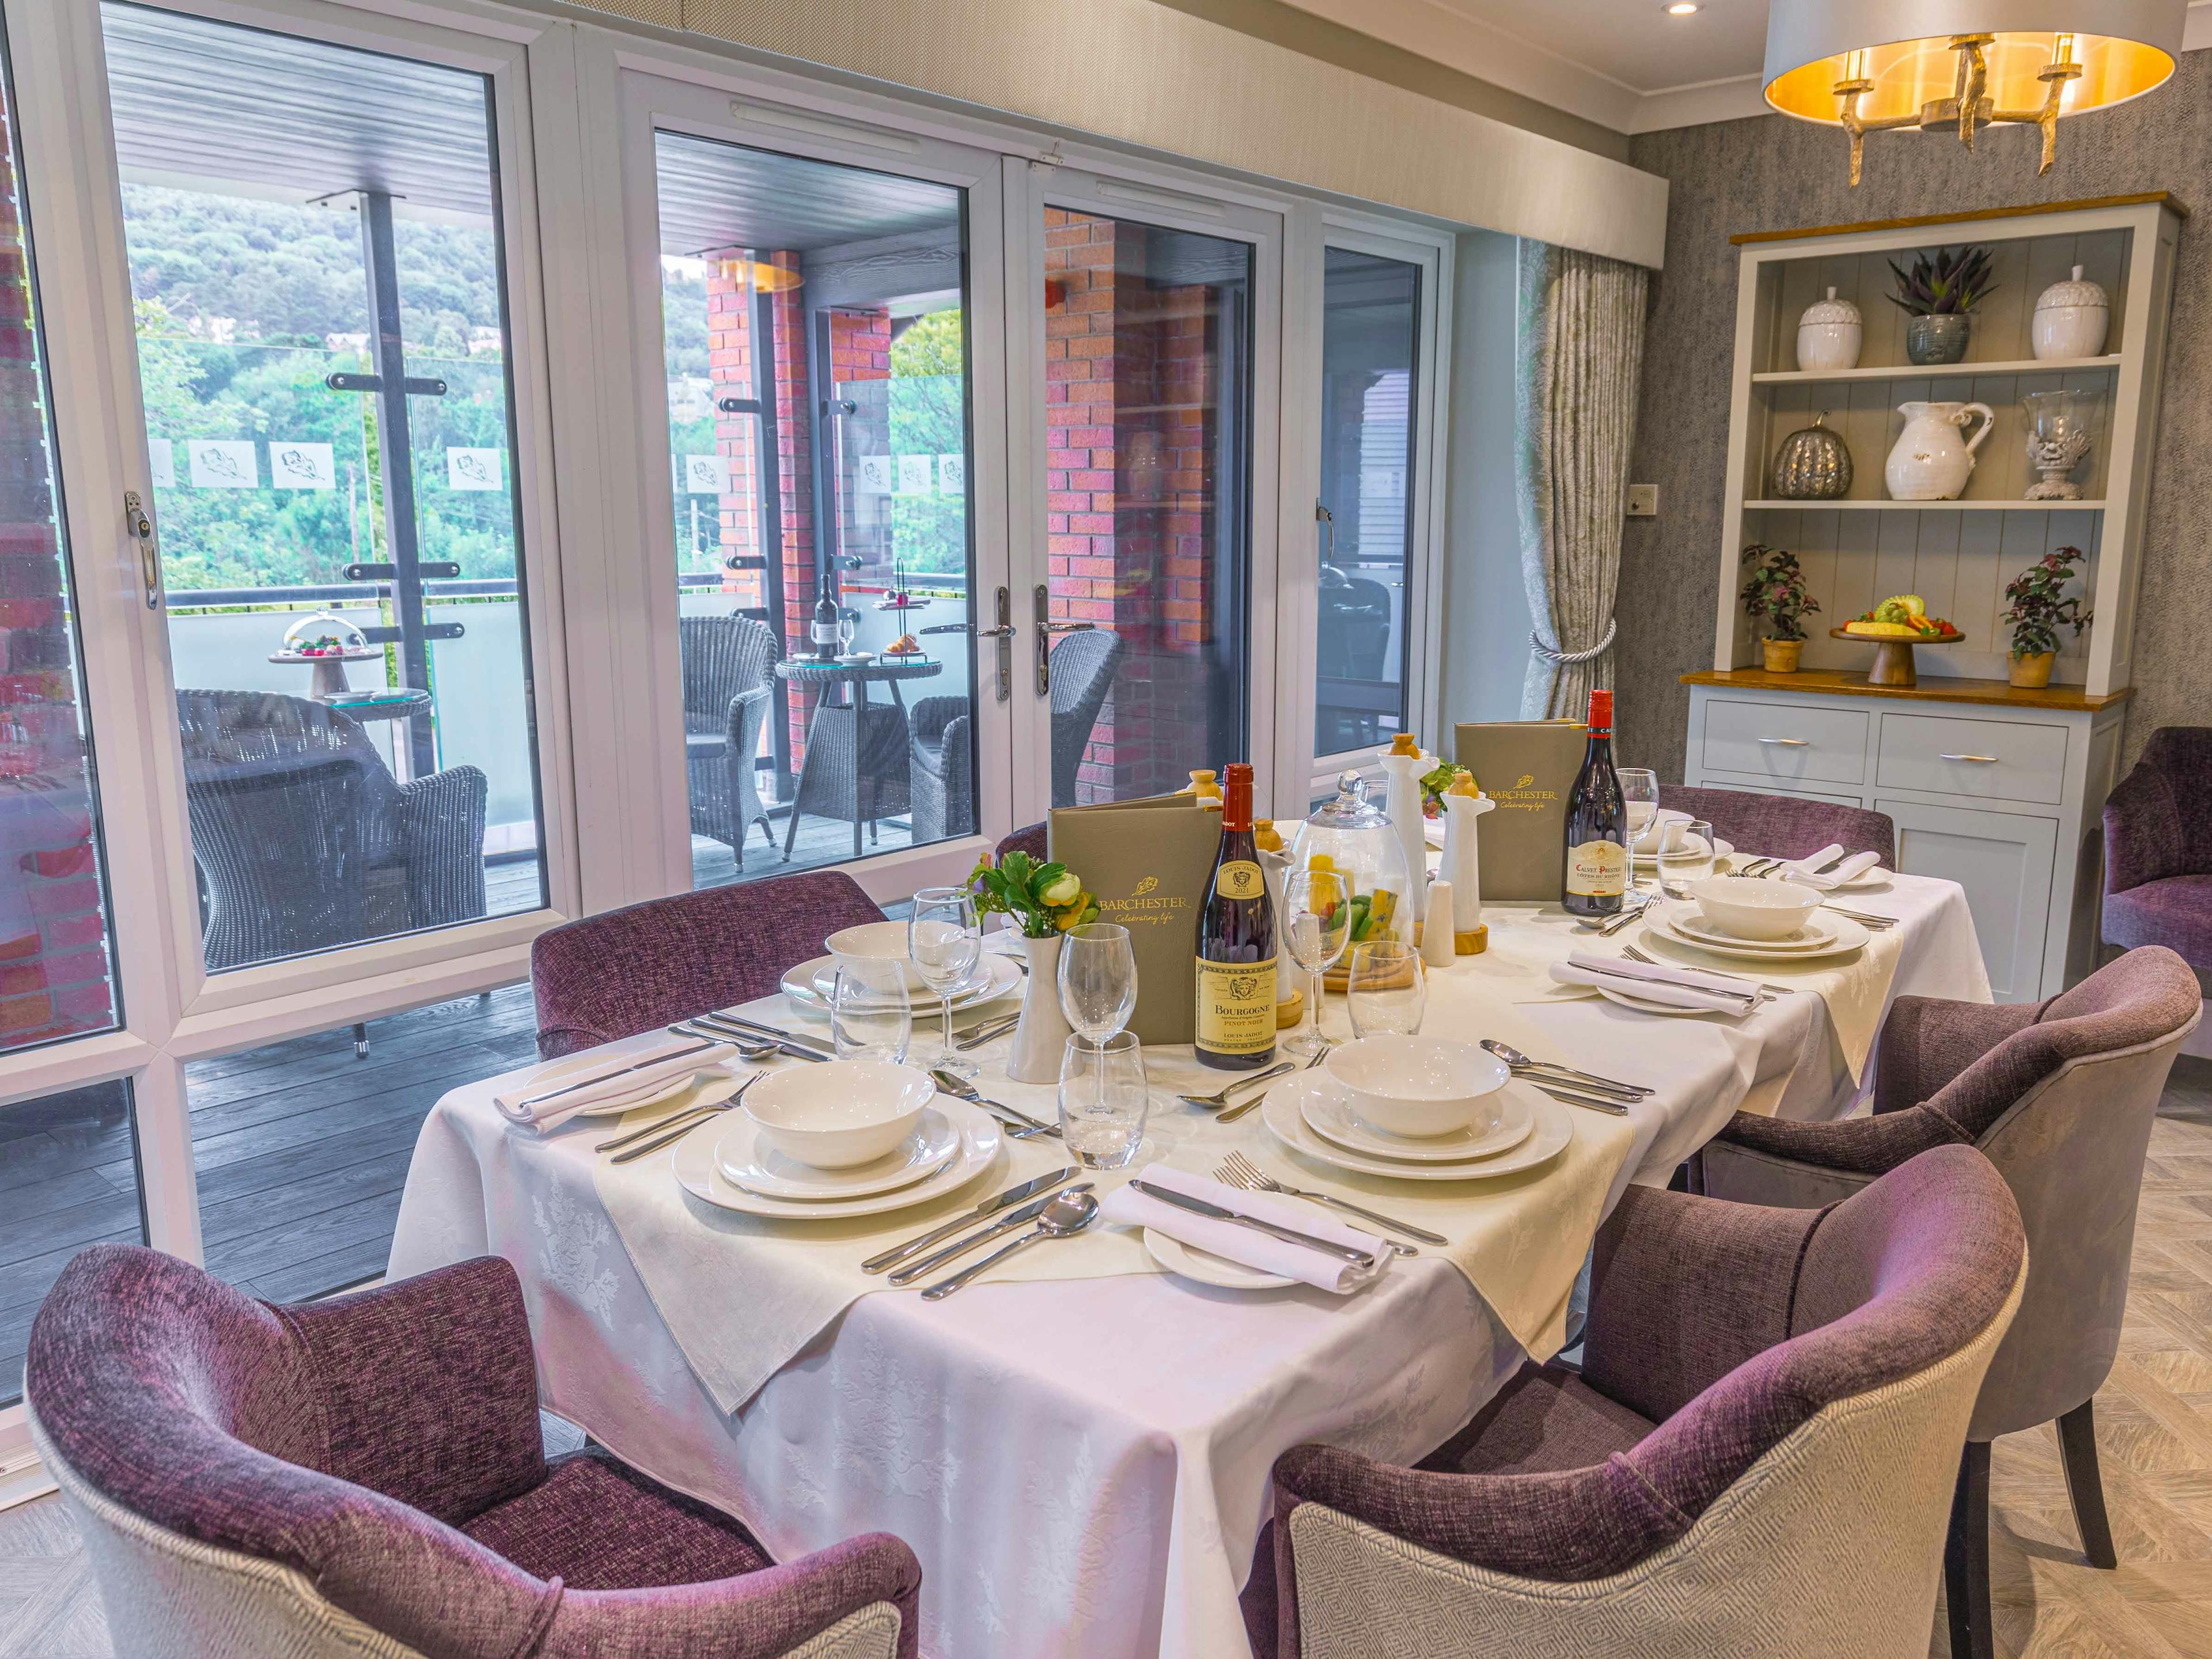 Dining Room at Elgar Court Care Home in Malvern, Worcestershire